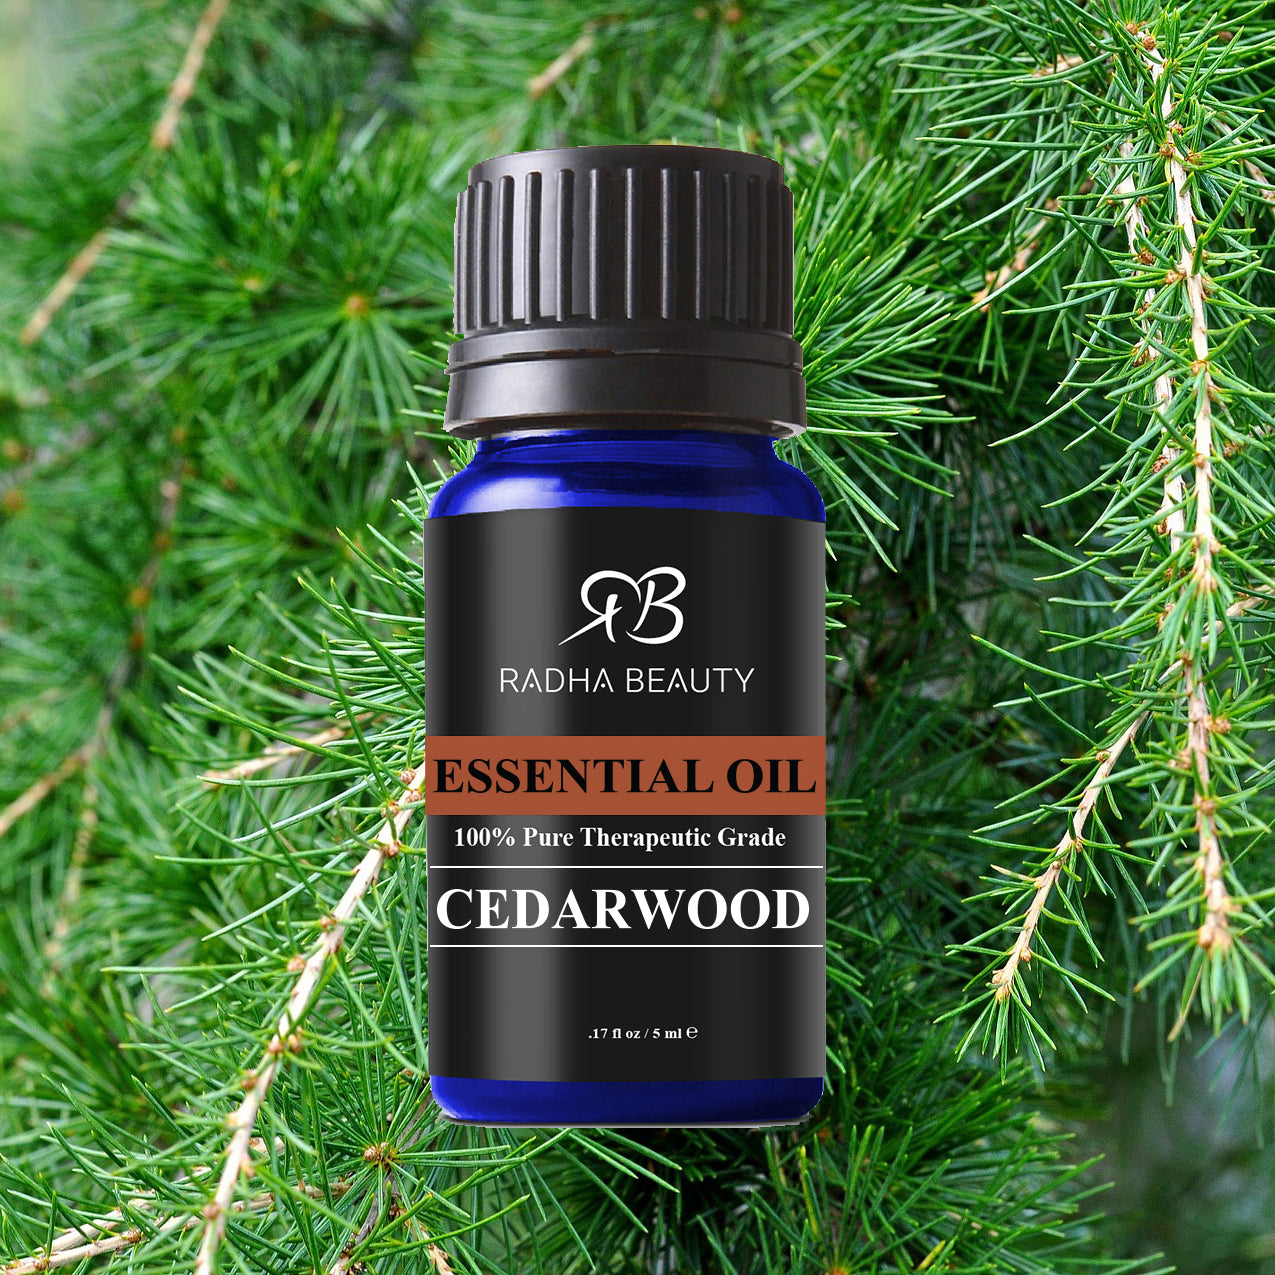 All About Cedarwood Essential Oil